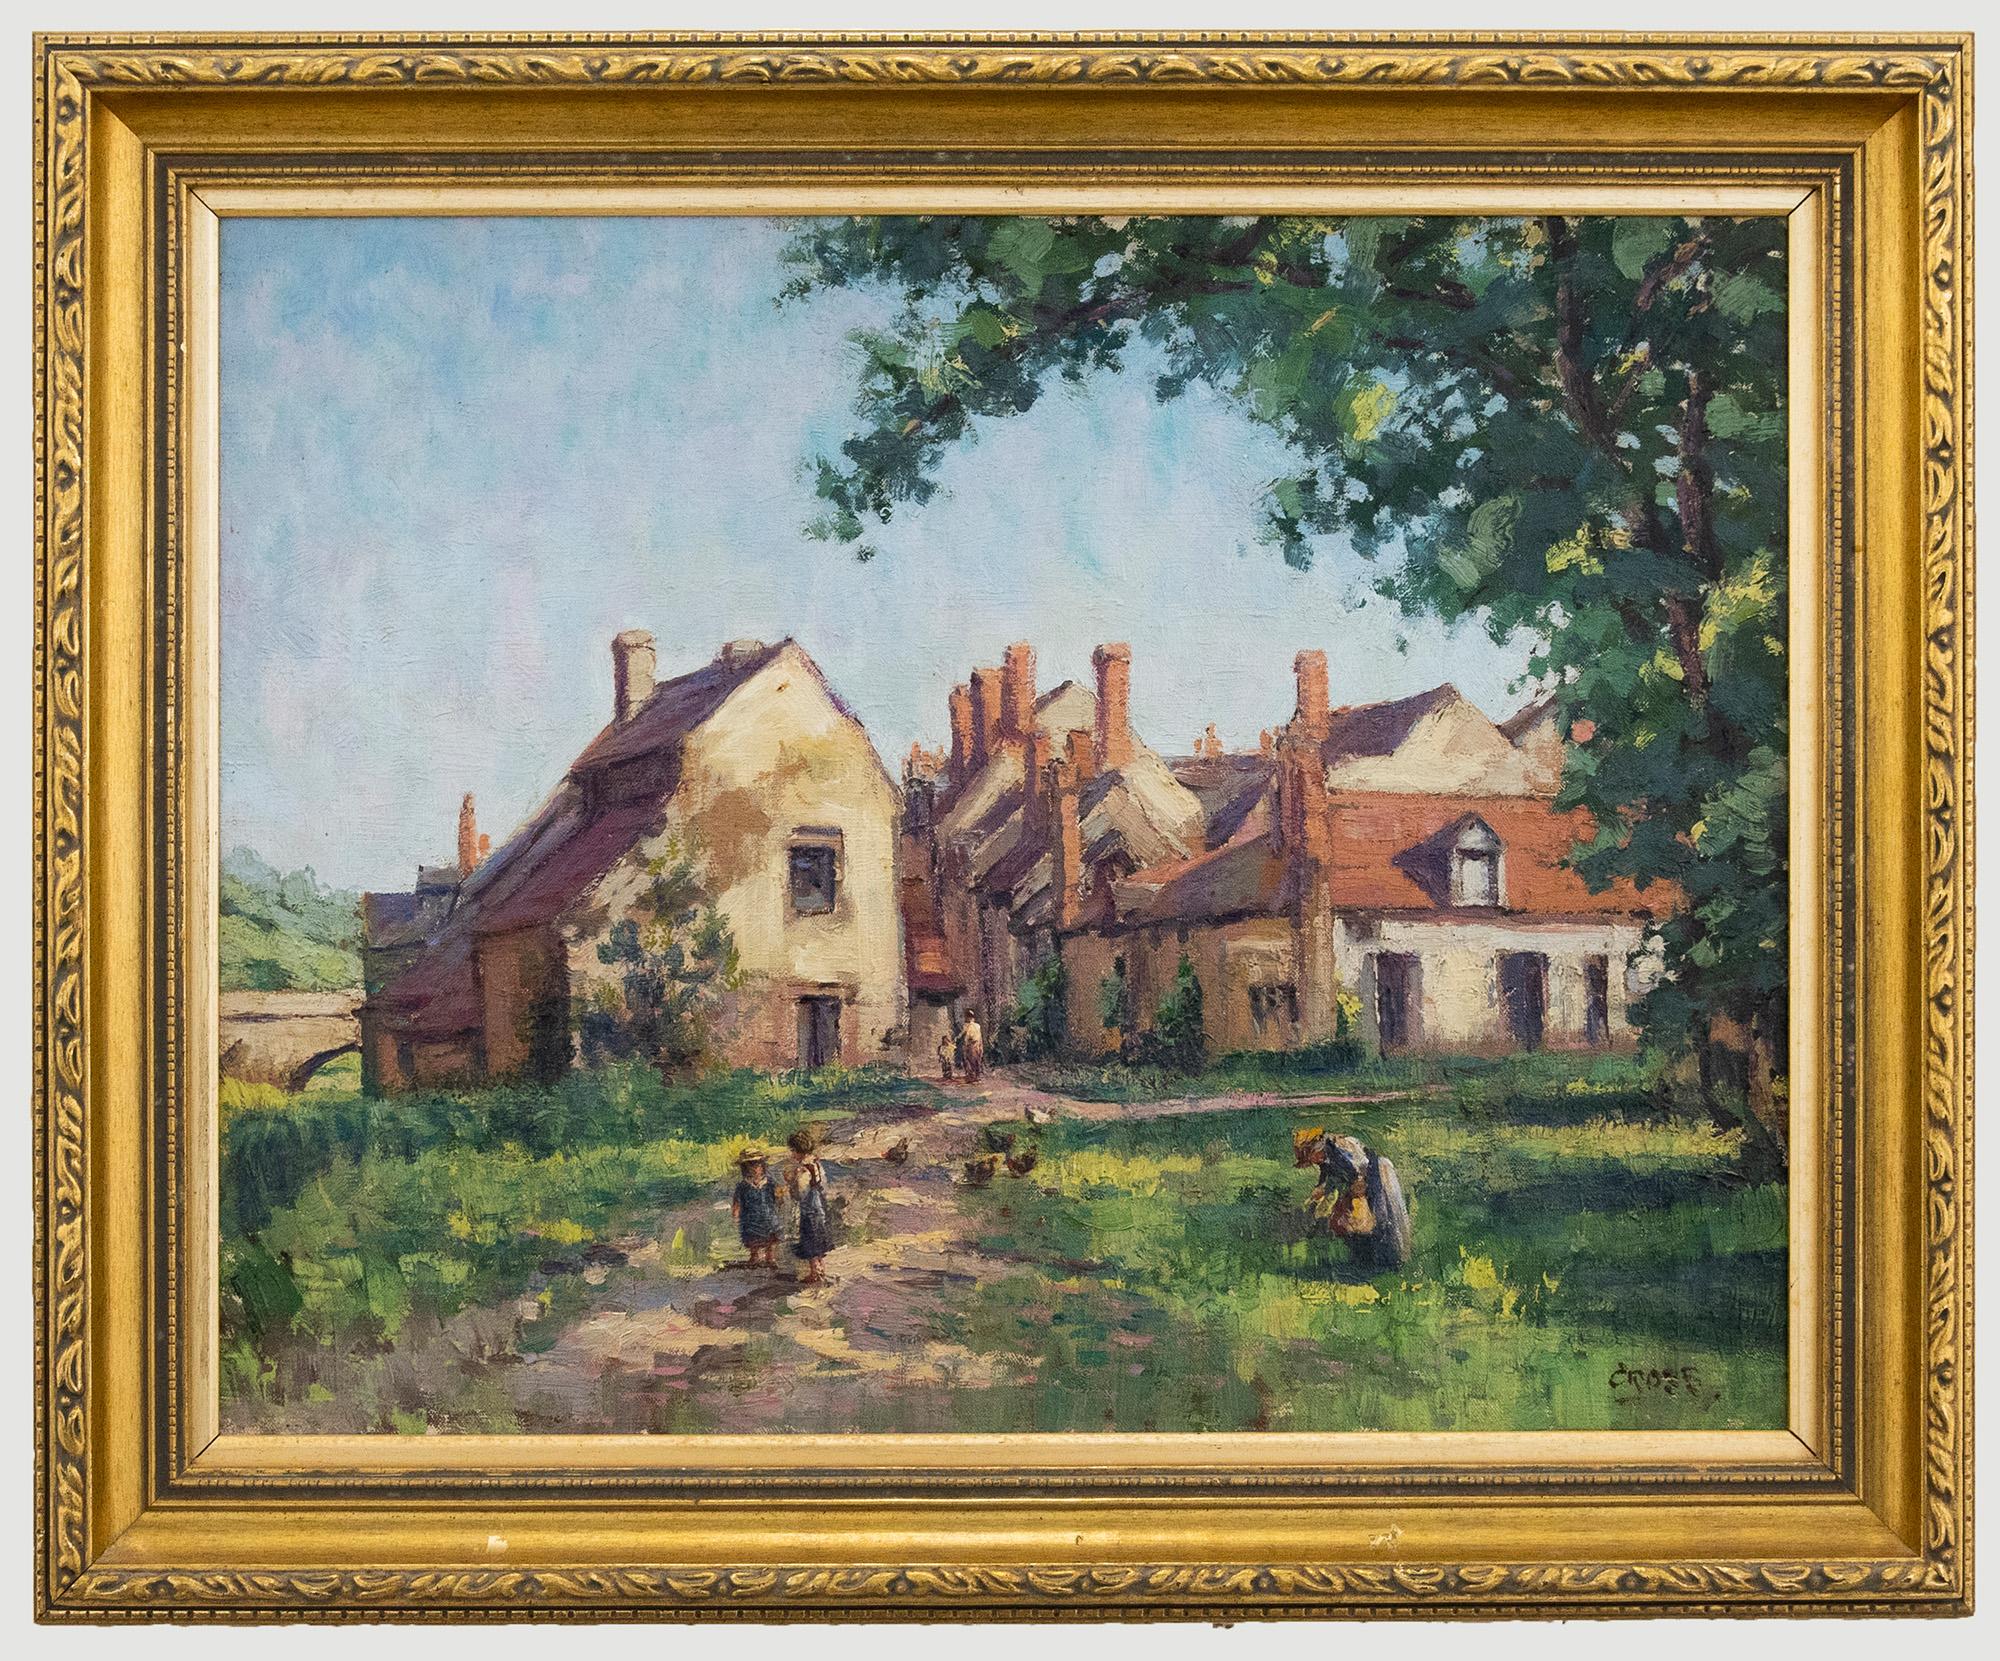 Unknown Landscape Painting - Framed 20th Century Oil - Summertime